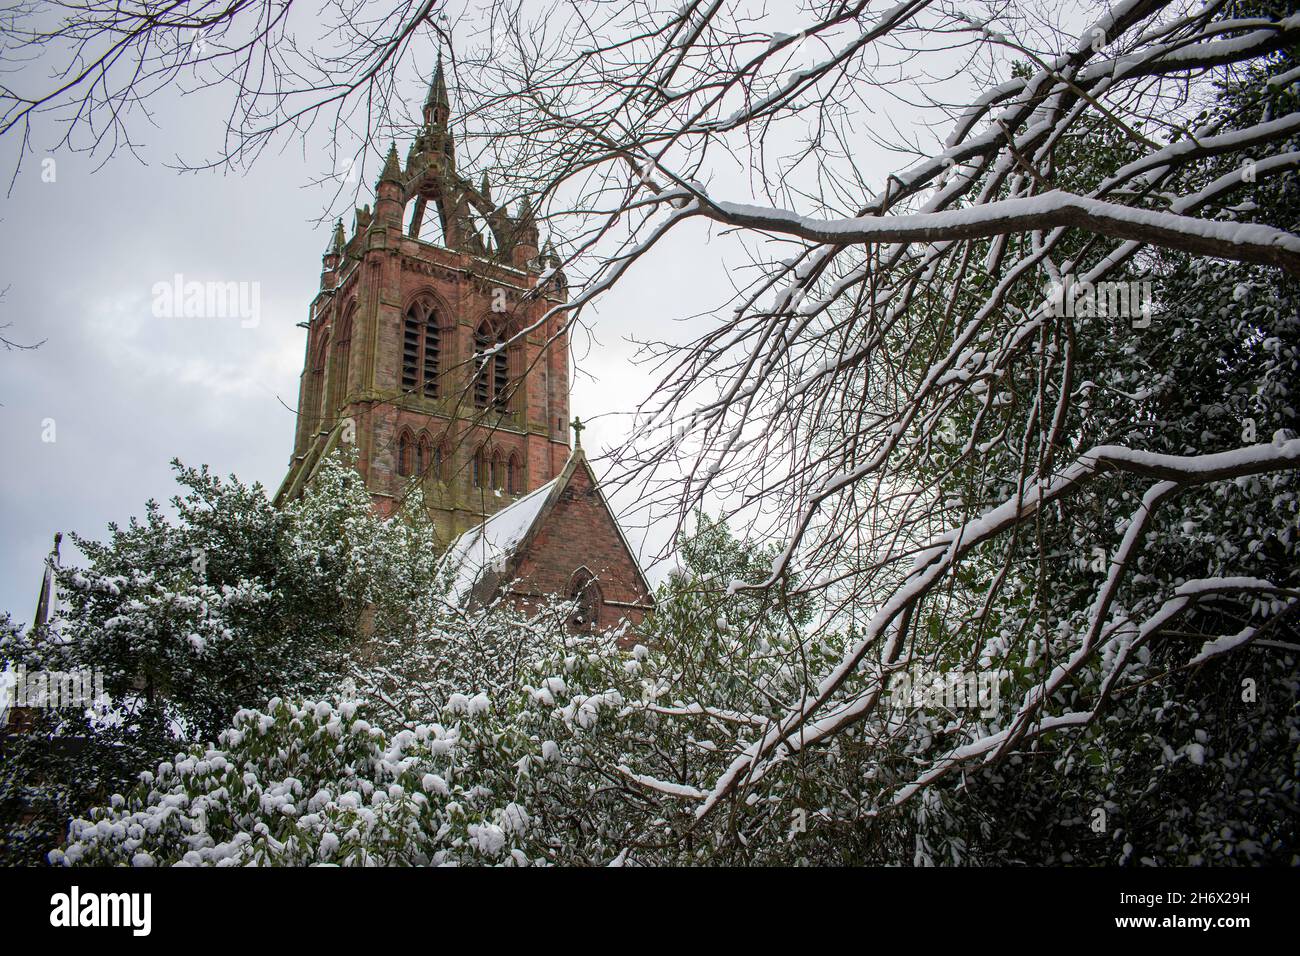 Shot of Thomas Coats Memorial Church located in Paisley, Scotland. Taken on a snowy day in February 2021. Stock Photo